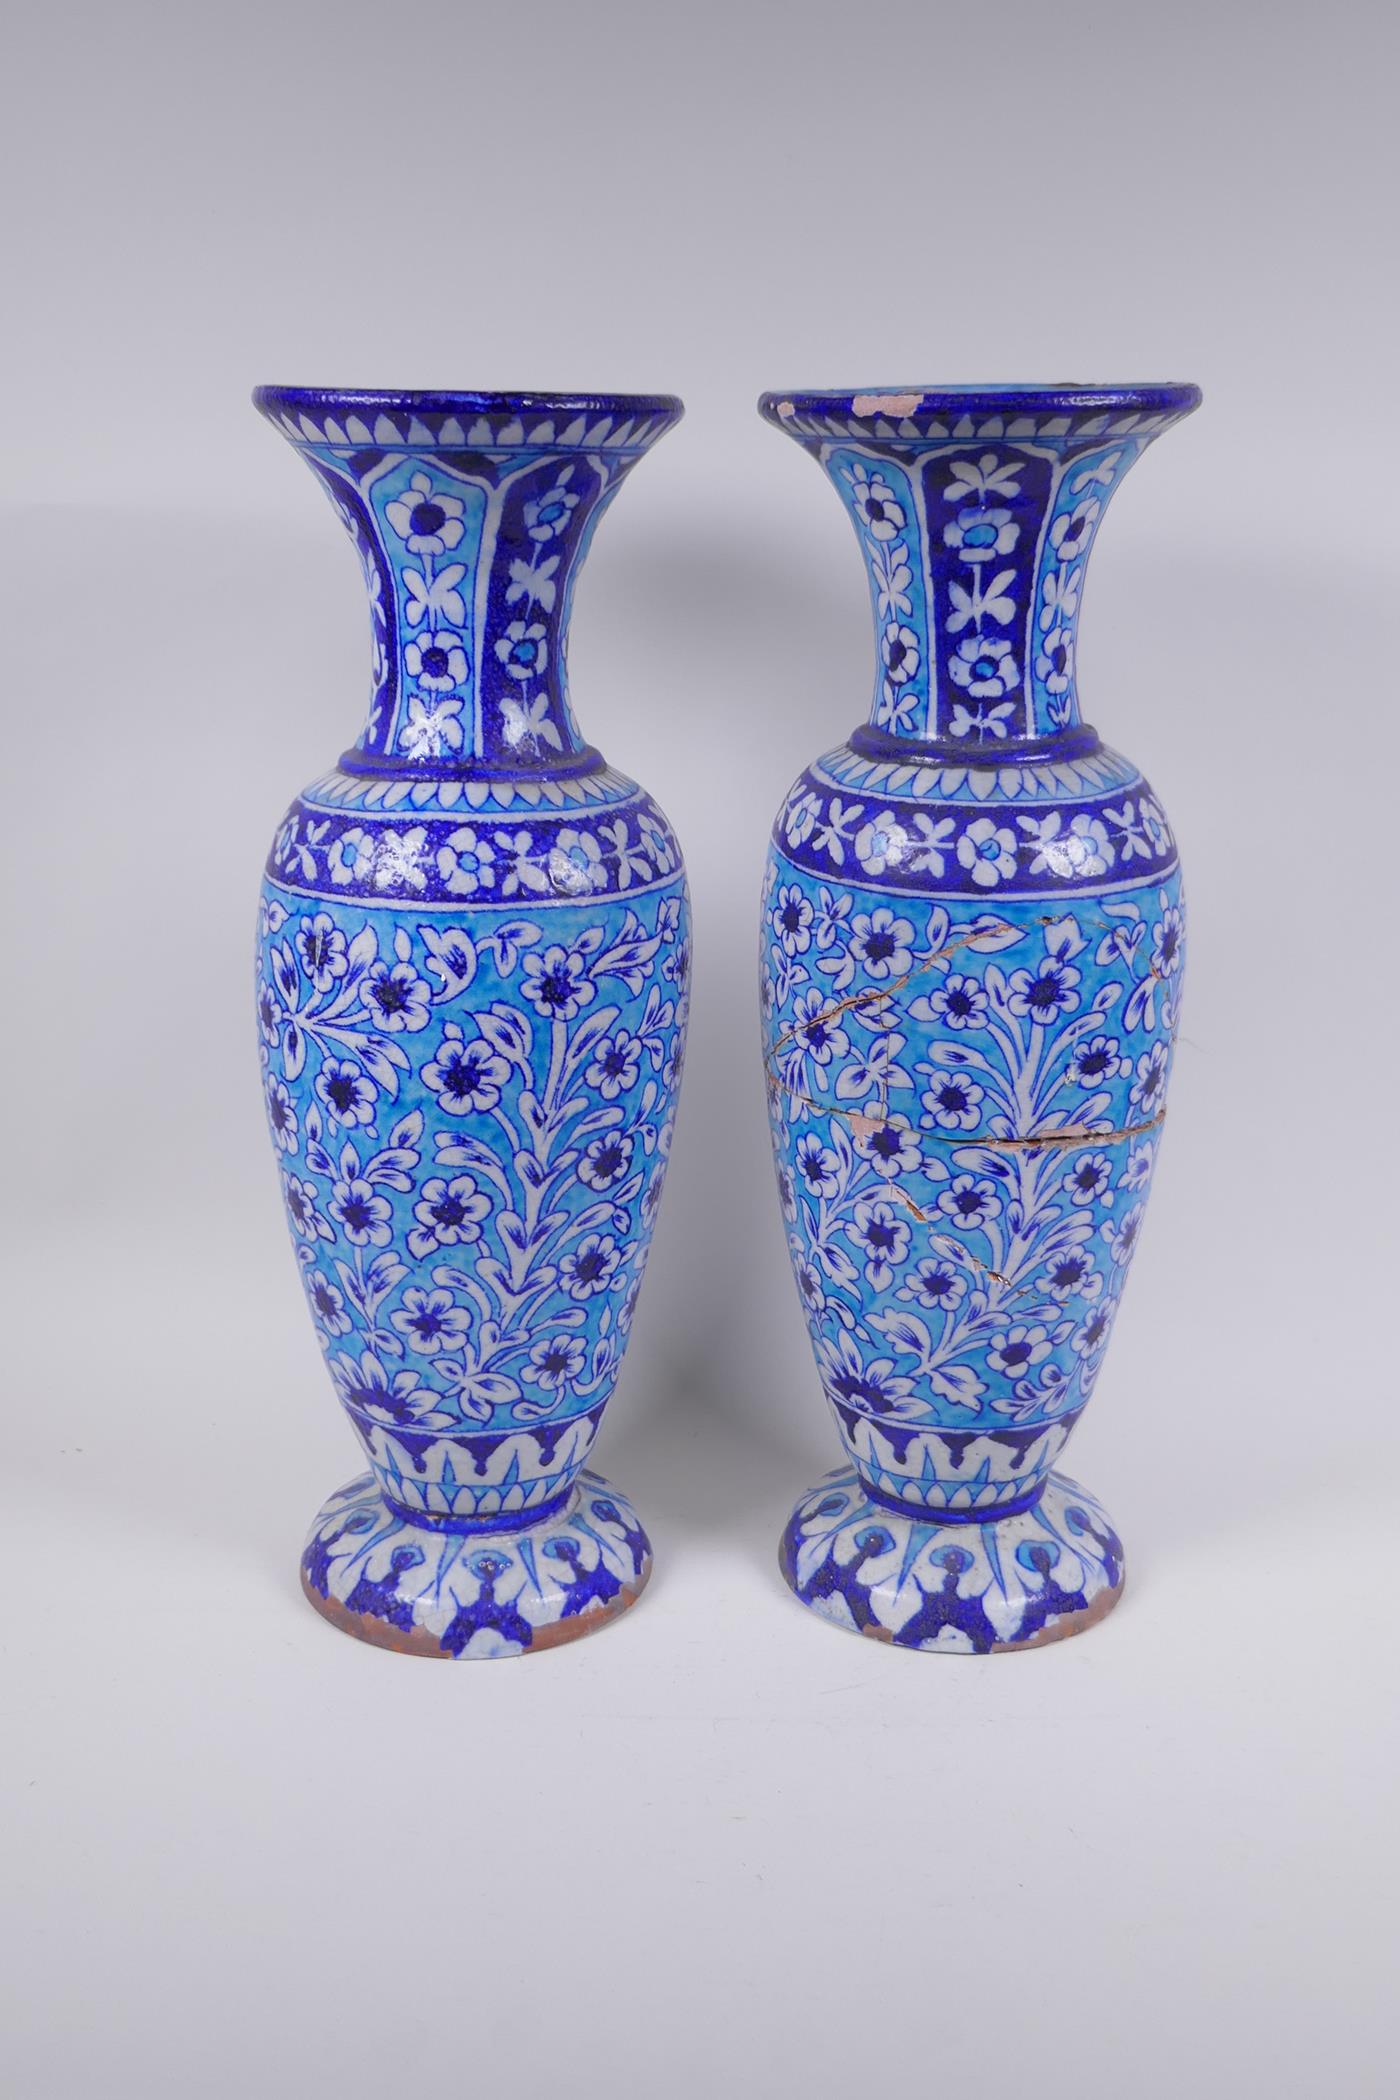 A pair of C19th Islamic Multan terracotta vases with blue Kashigari designs, AF, 46cm high - Image 2 of 5